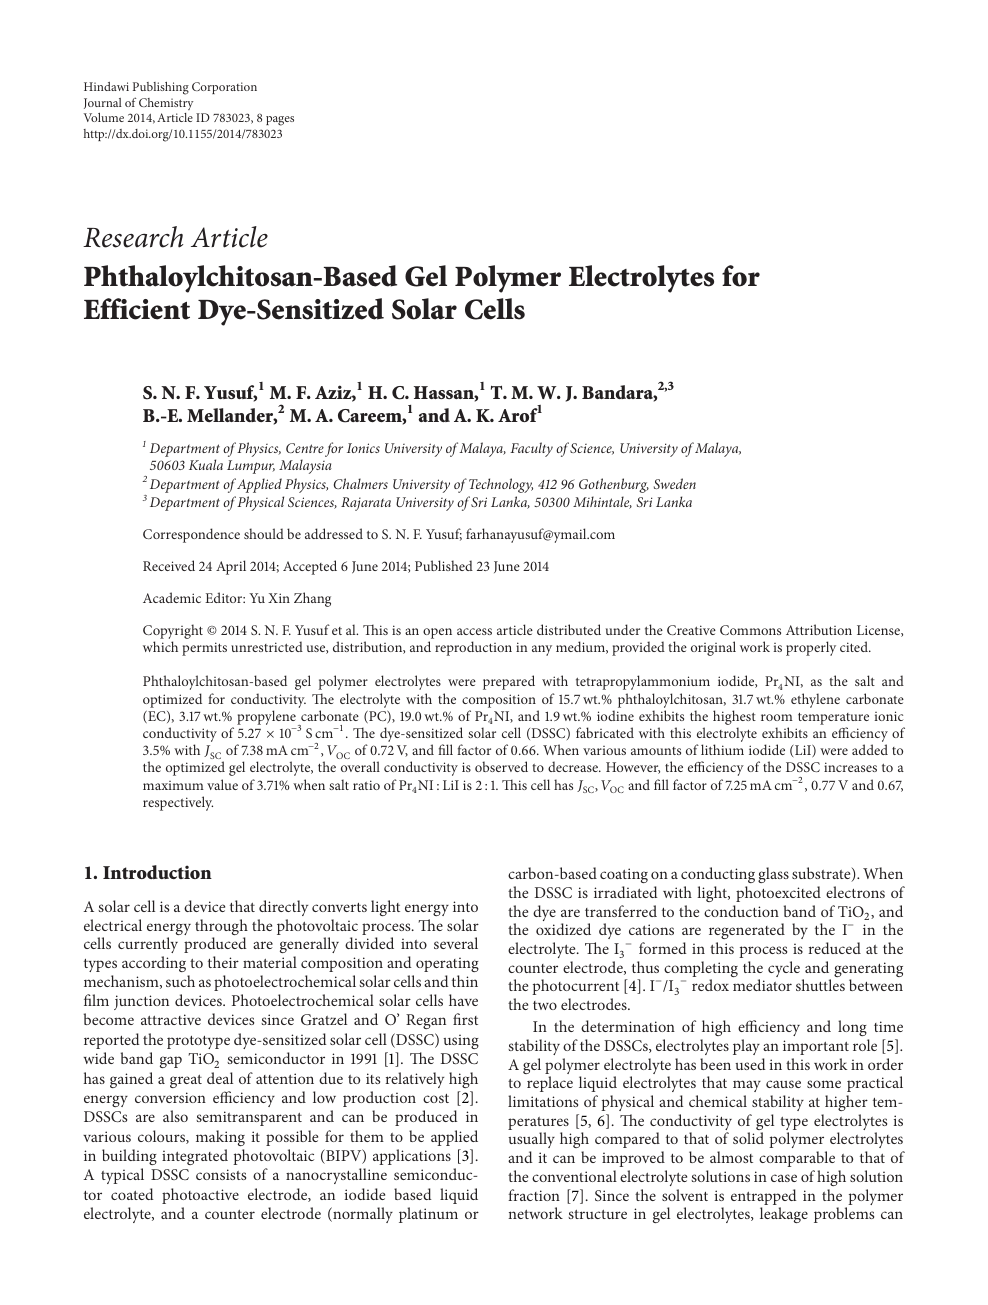 Phthaloylchitosan Based Gel Polymer Electrolytes For Efficient Dye Sensitized Solar Cells Topic Of Research Paper In Chemical Sciences Download Scholarly Article Pdf And Read For Free On Cyberleninka Open Science Hub